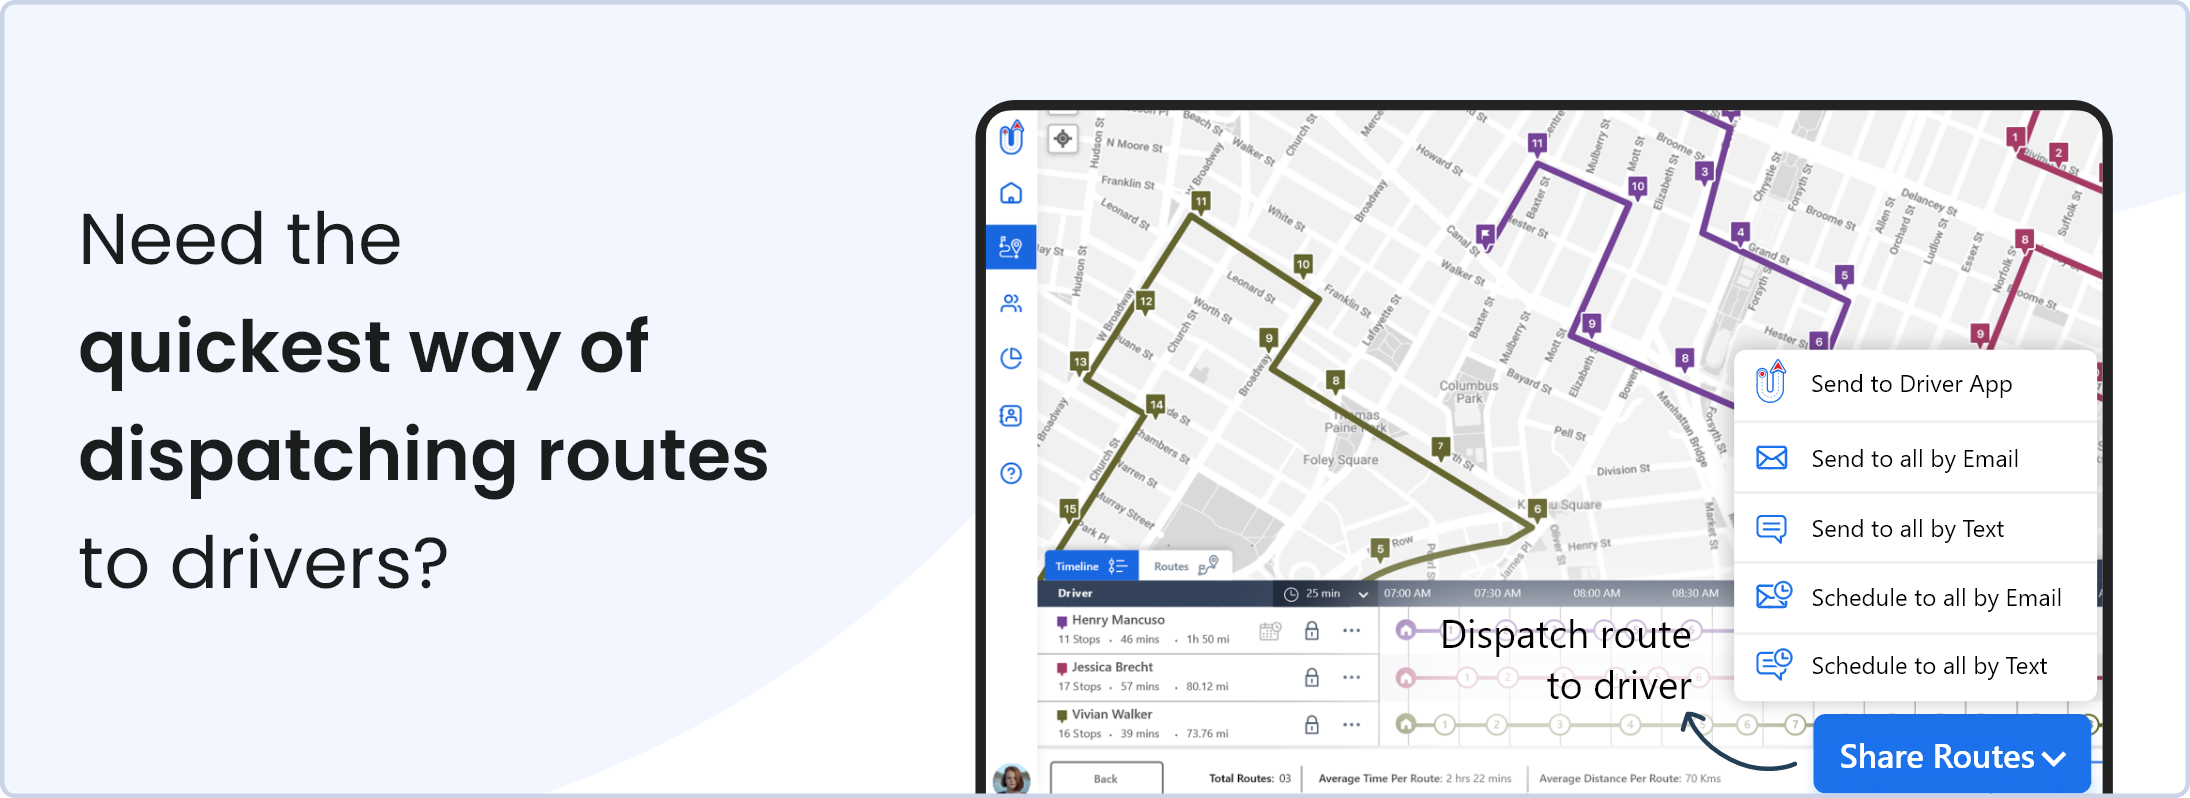 dispatch routes to drivers with upper